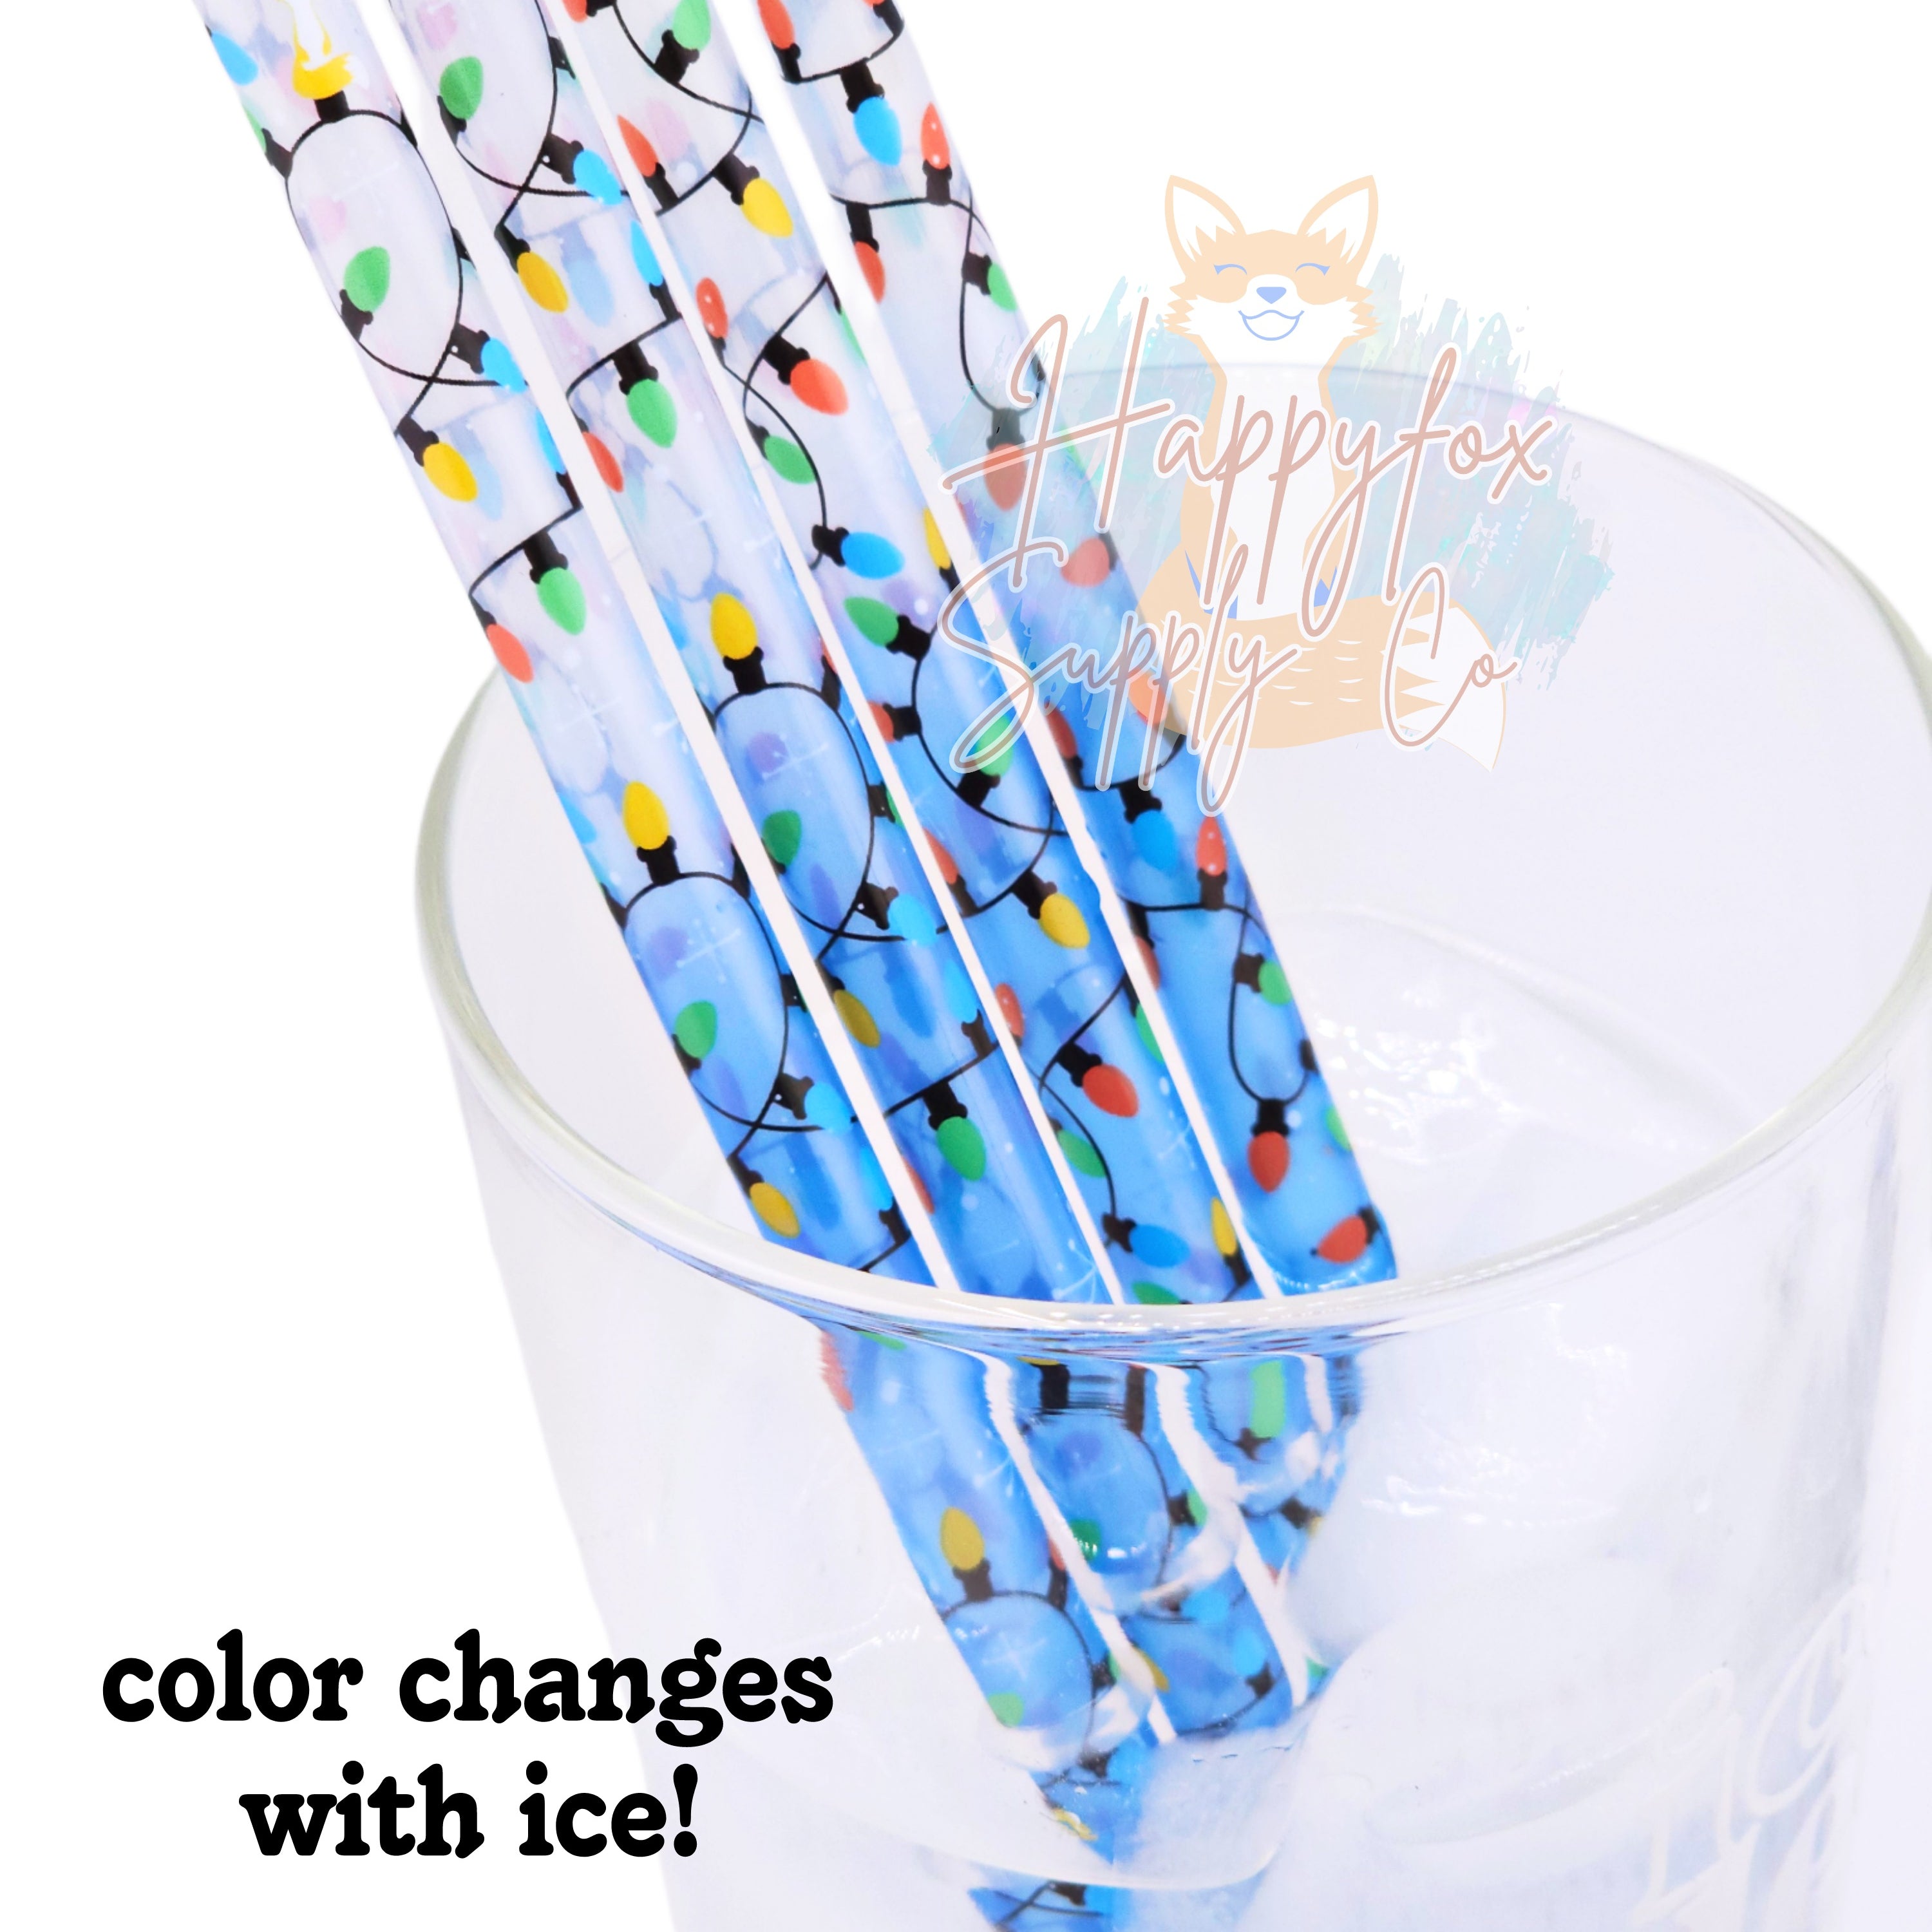 10" Holiday Lights Straws with color change option